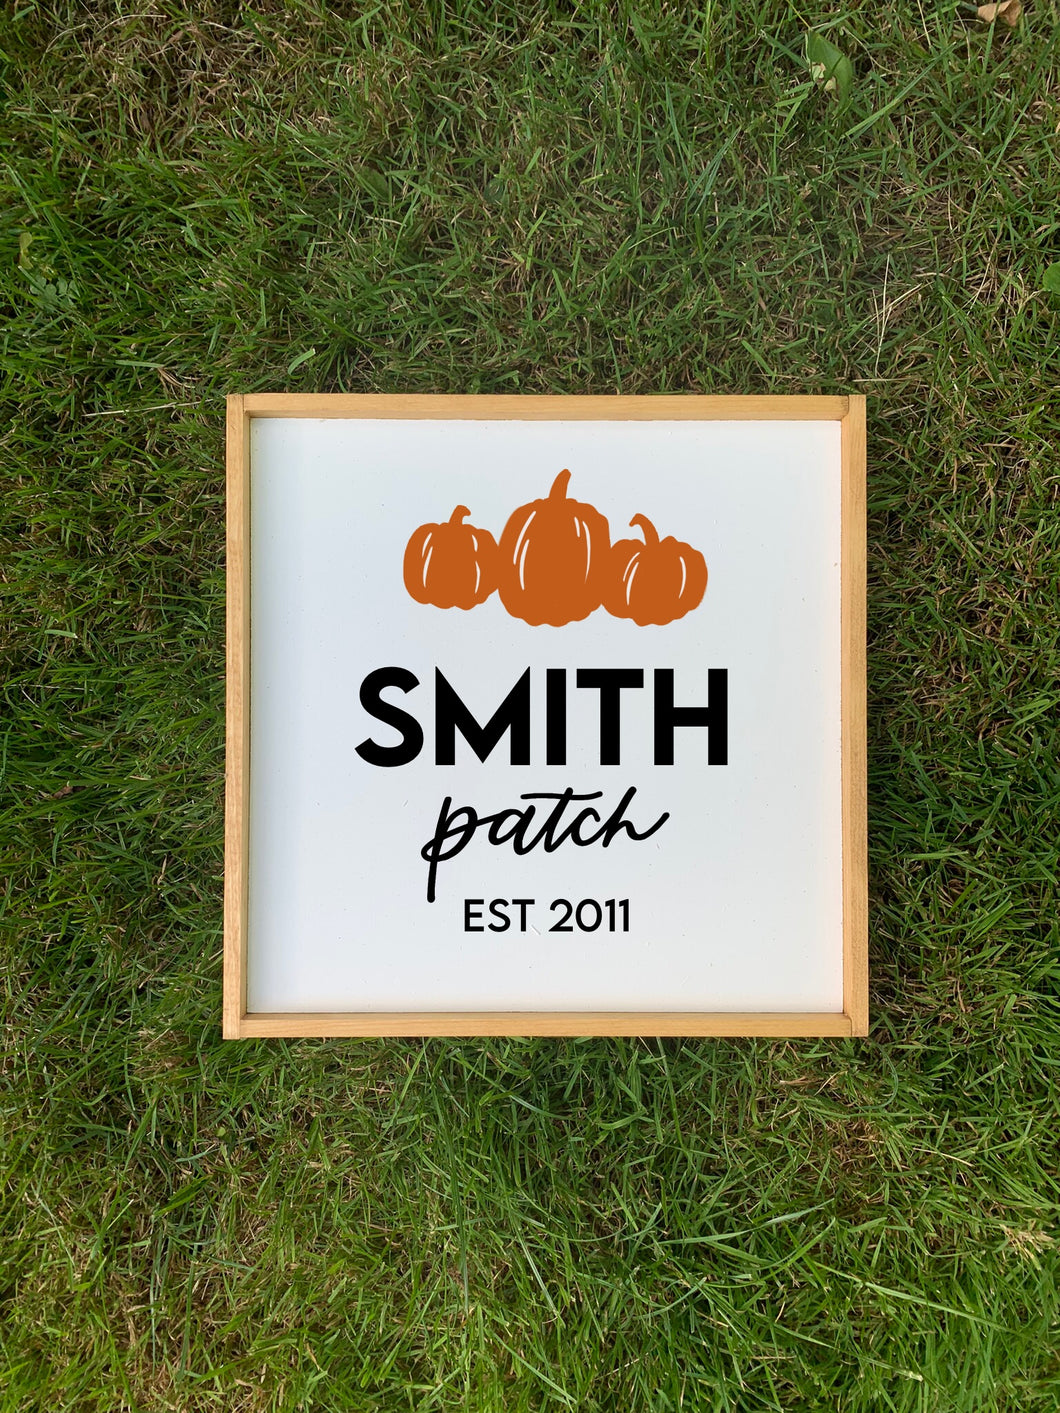 Personalized patch sign